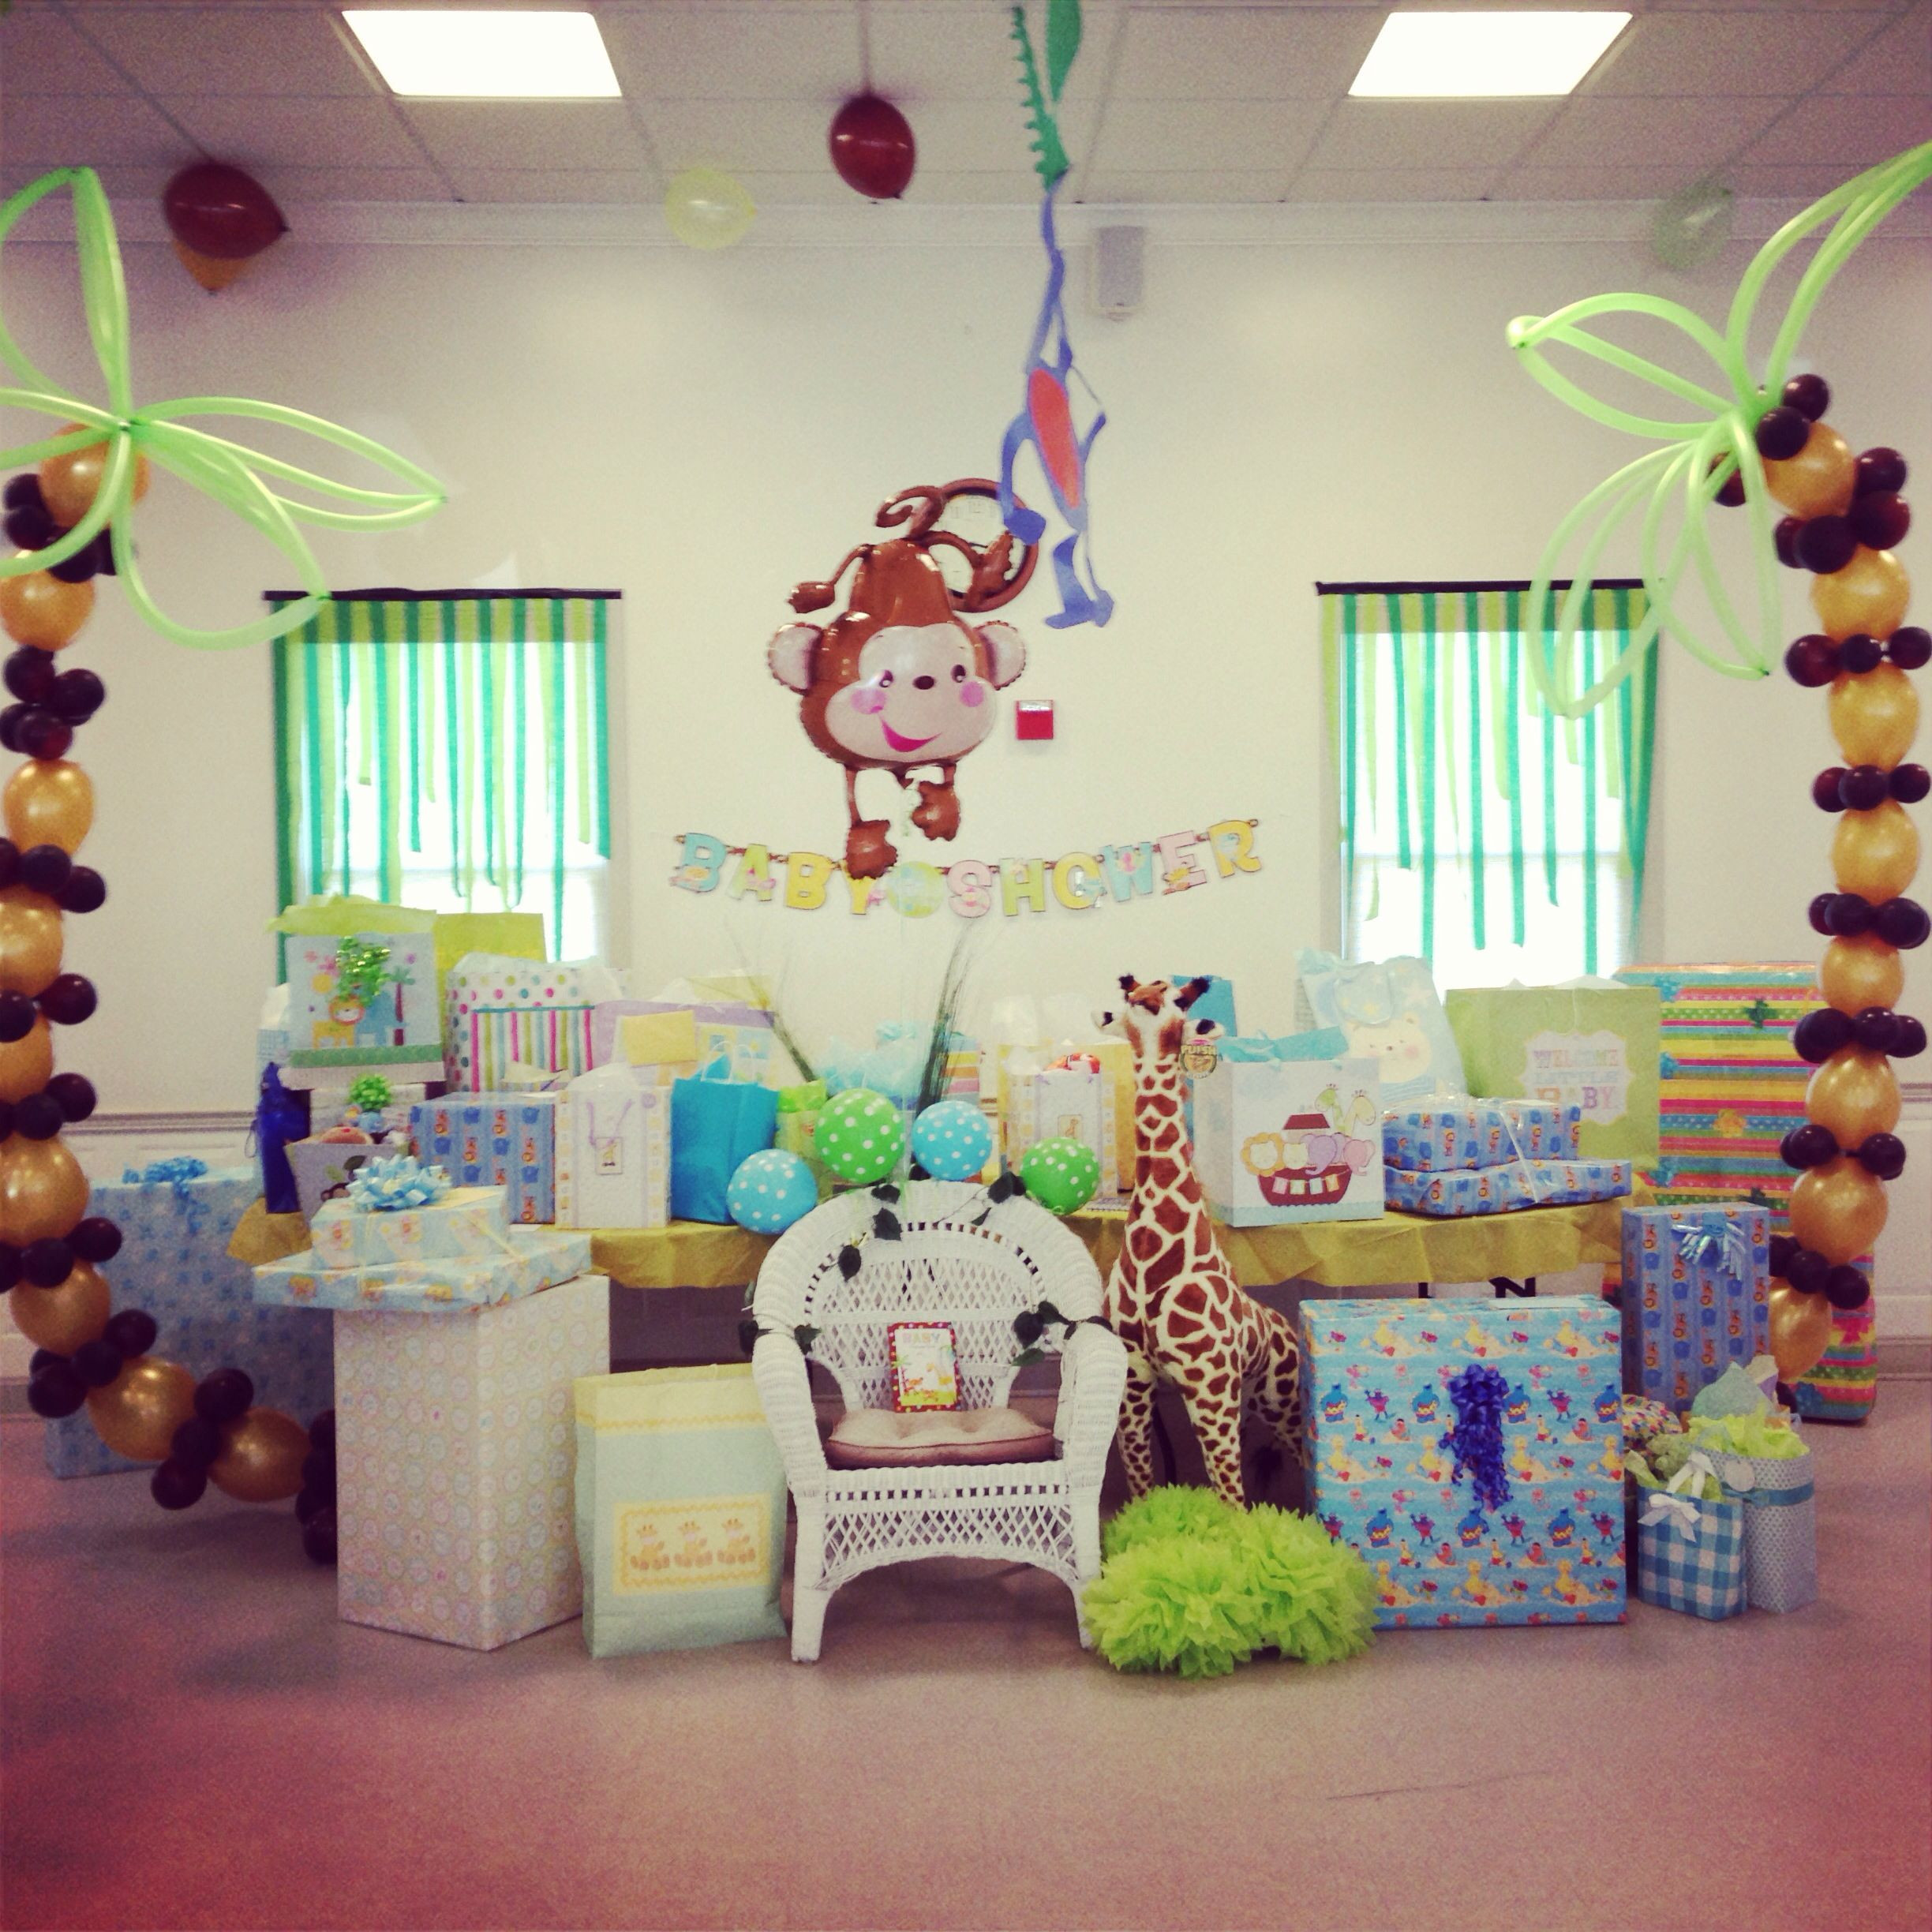 Decorating Ideas For Baby Shower Gift Table
 Gift table jungle themed baby shower in 2019